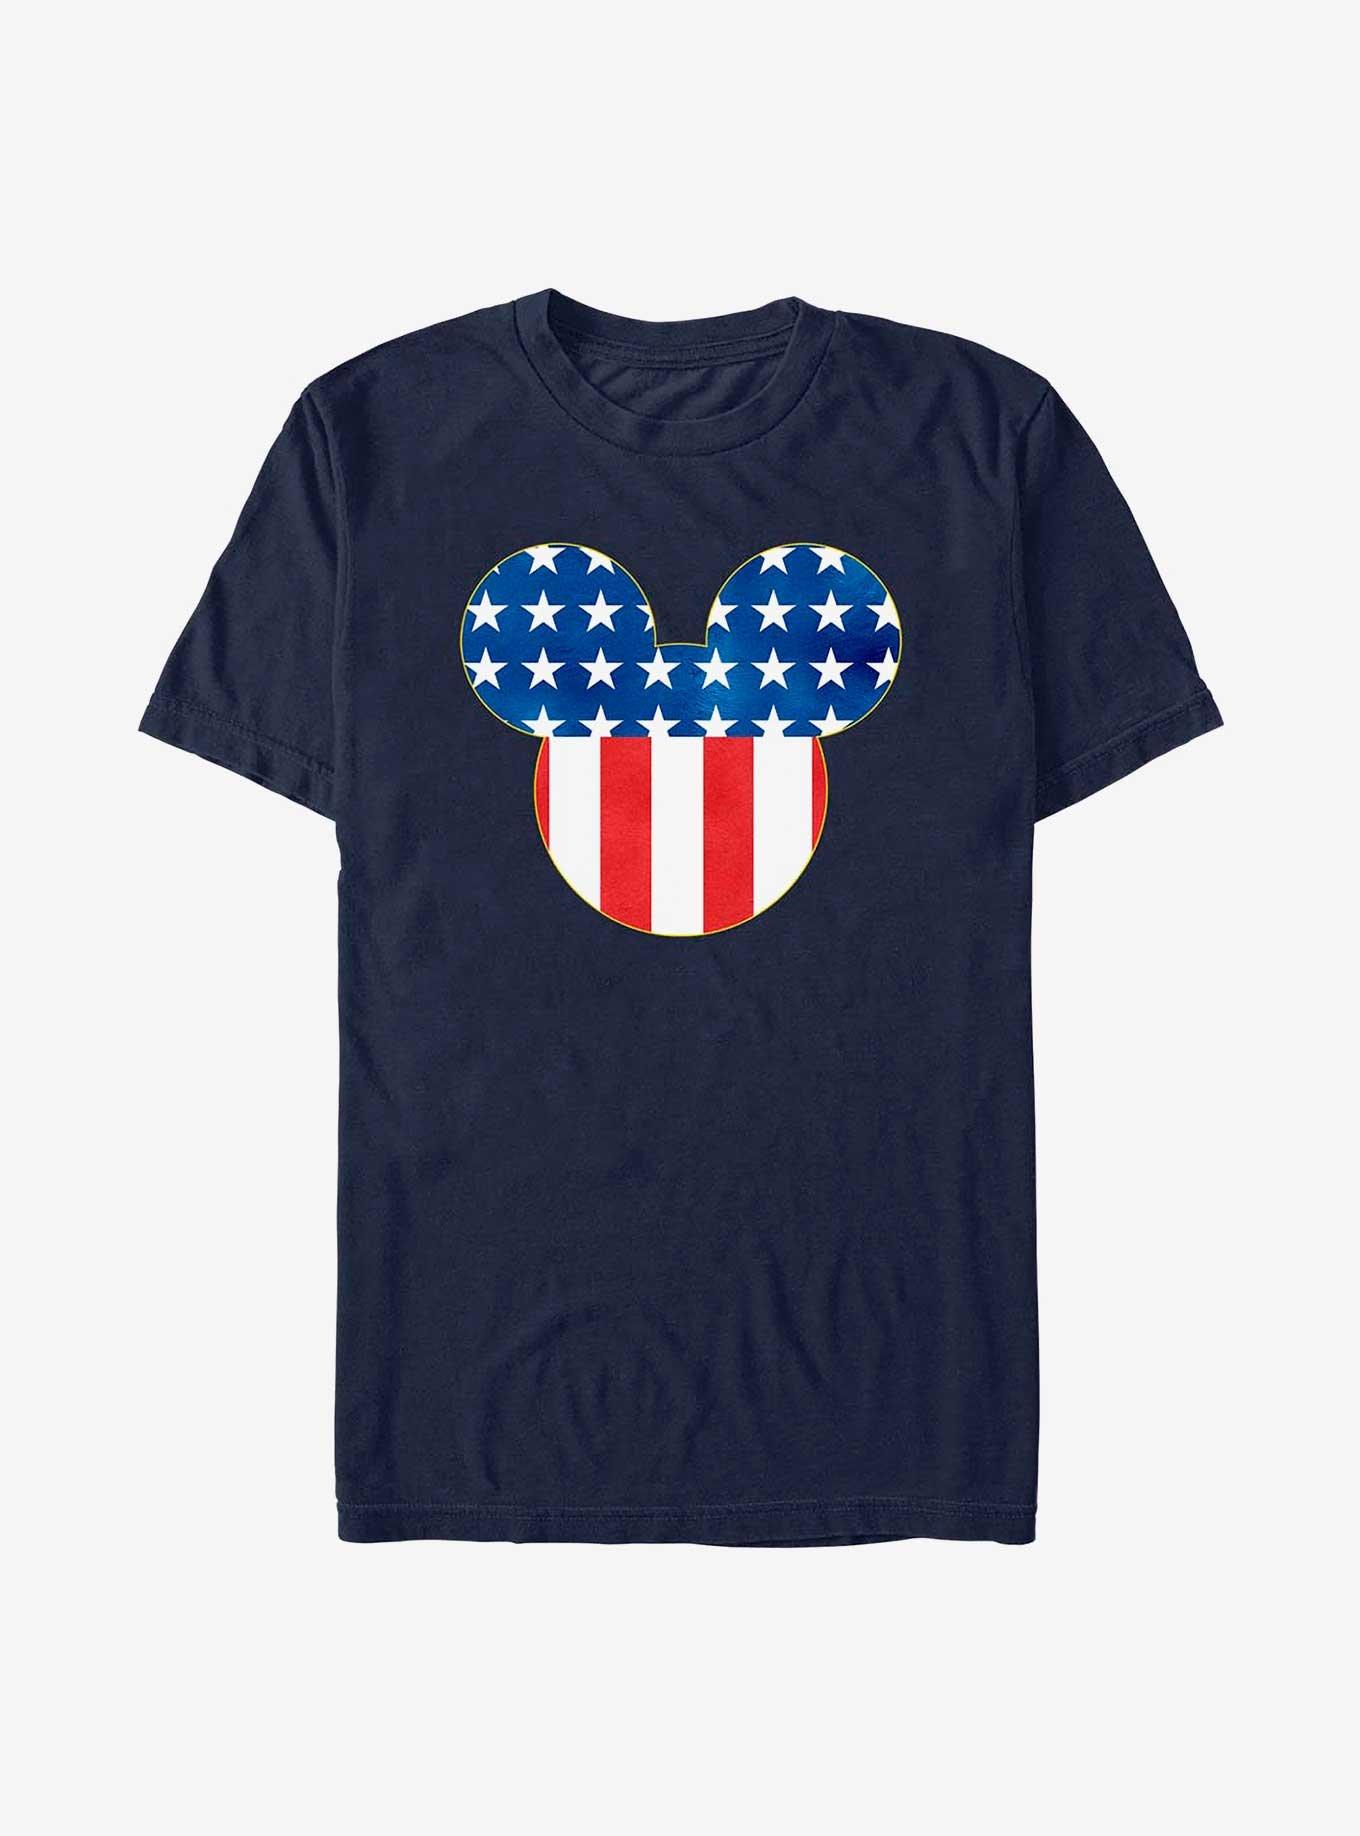 Disney Mickey Mouse Patriotic Mouse Ears T-Shirt, NAVY, hi-res